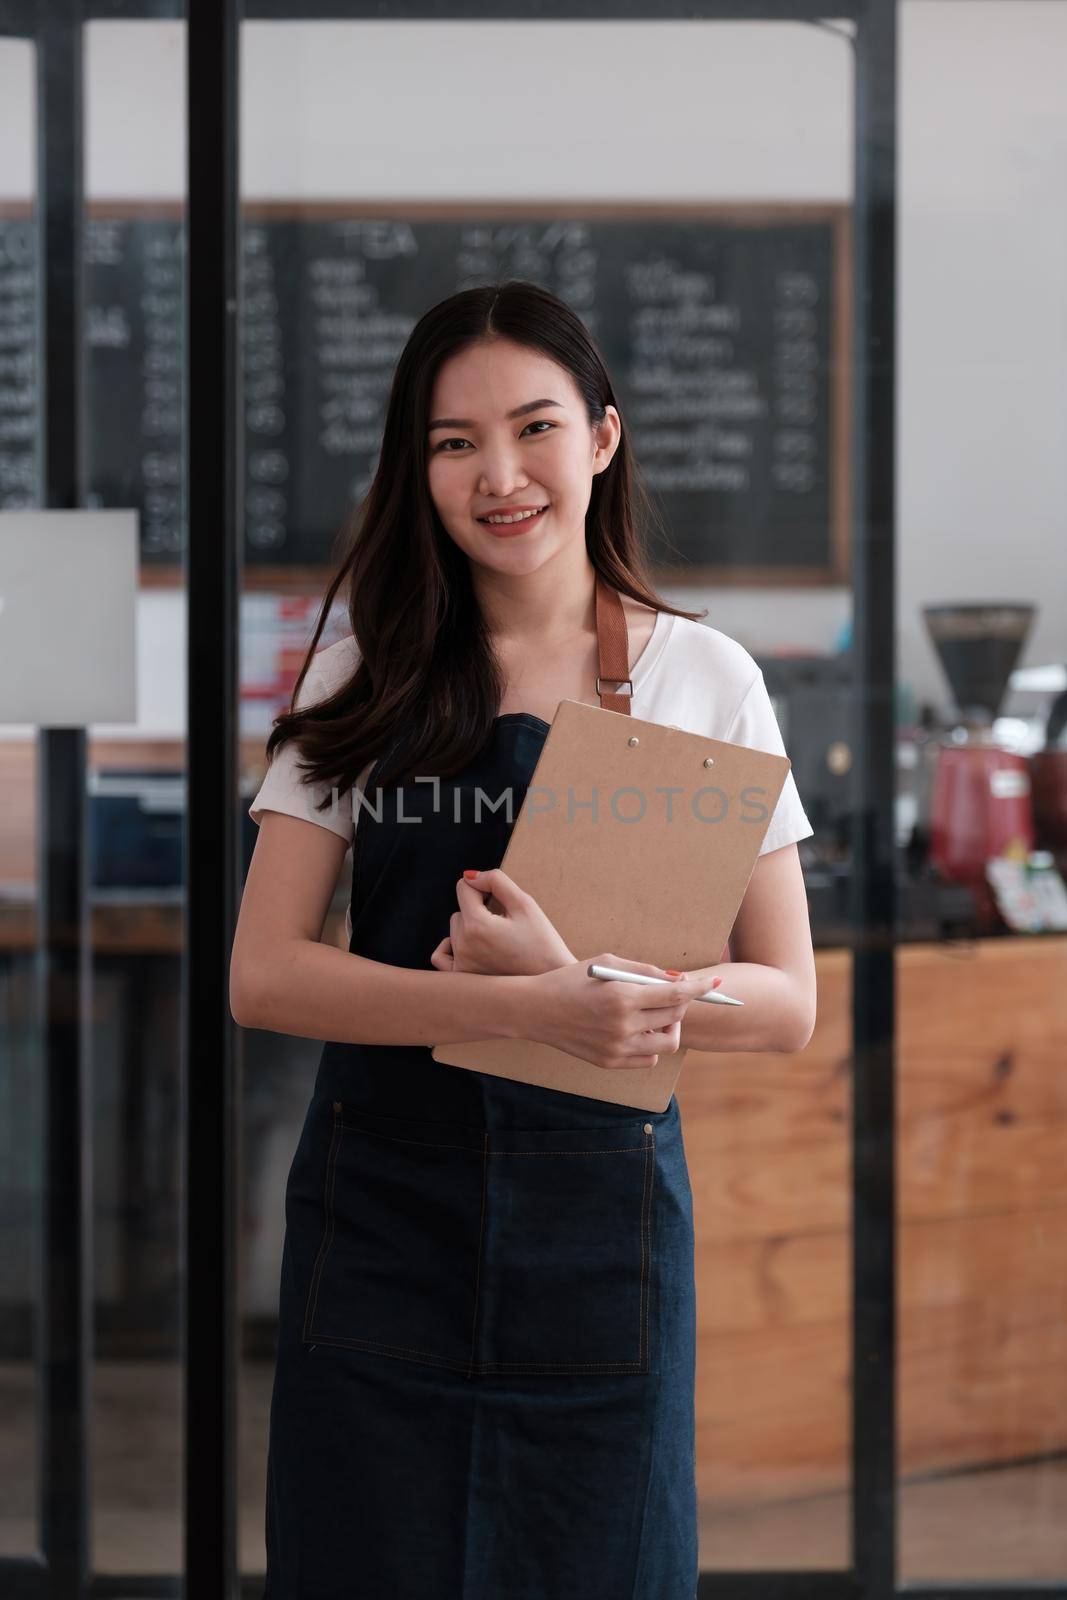 At her coffee shop, the business owner or barista with menu and waiting order from first customer back to open the shop after COVID-19. by itchaznong